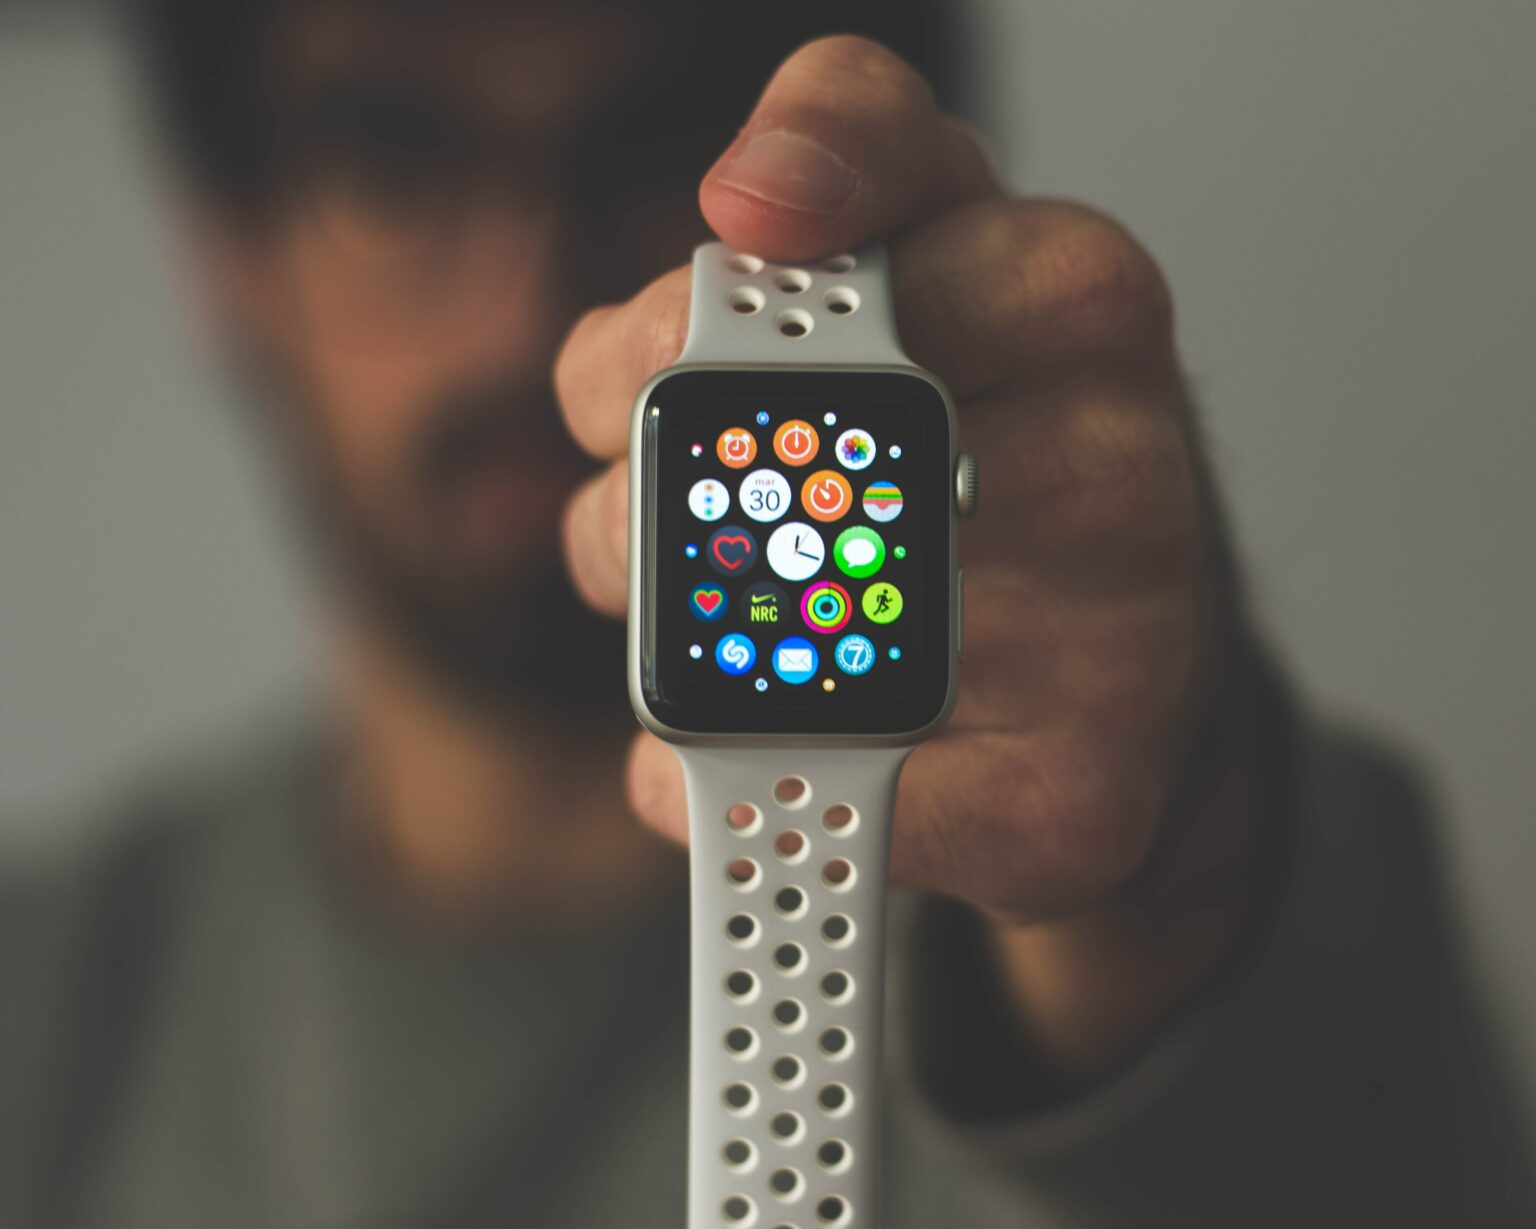 Change Apple Watch app layout from honeycomb grid to list view.